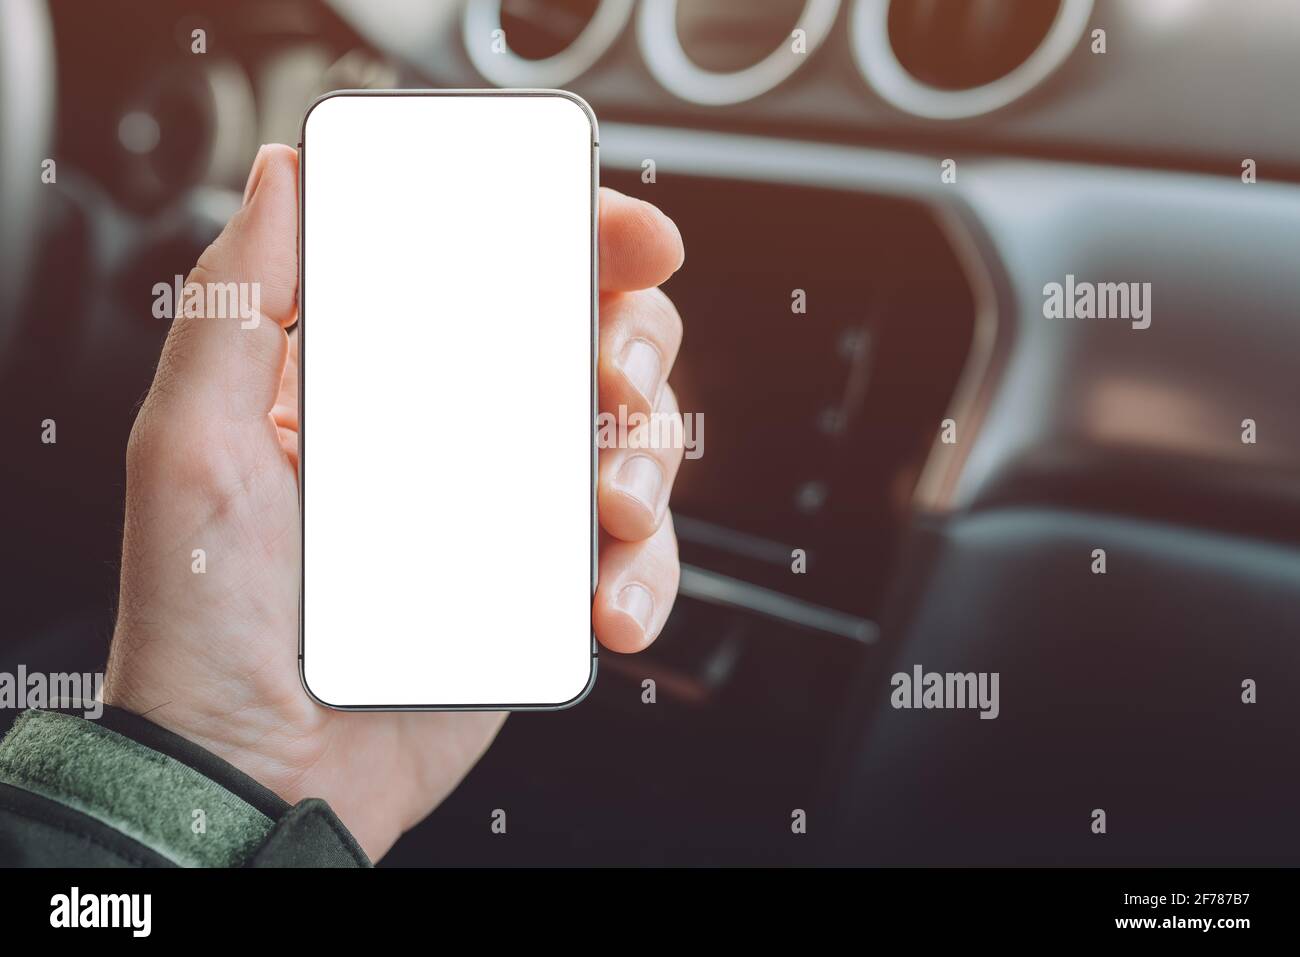 Mobile smart phone device in male hand, mock up with blank white screen. Man sitting in car and holding smartphone. Stock Photo